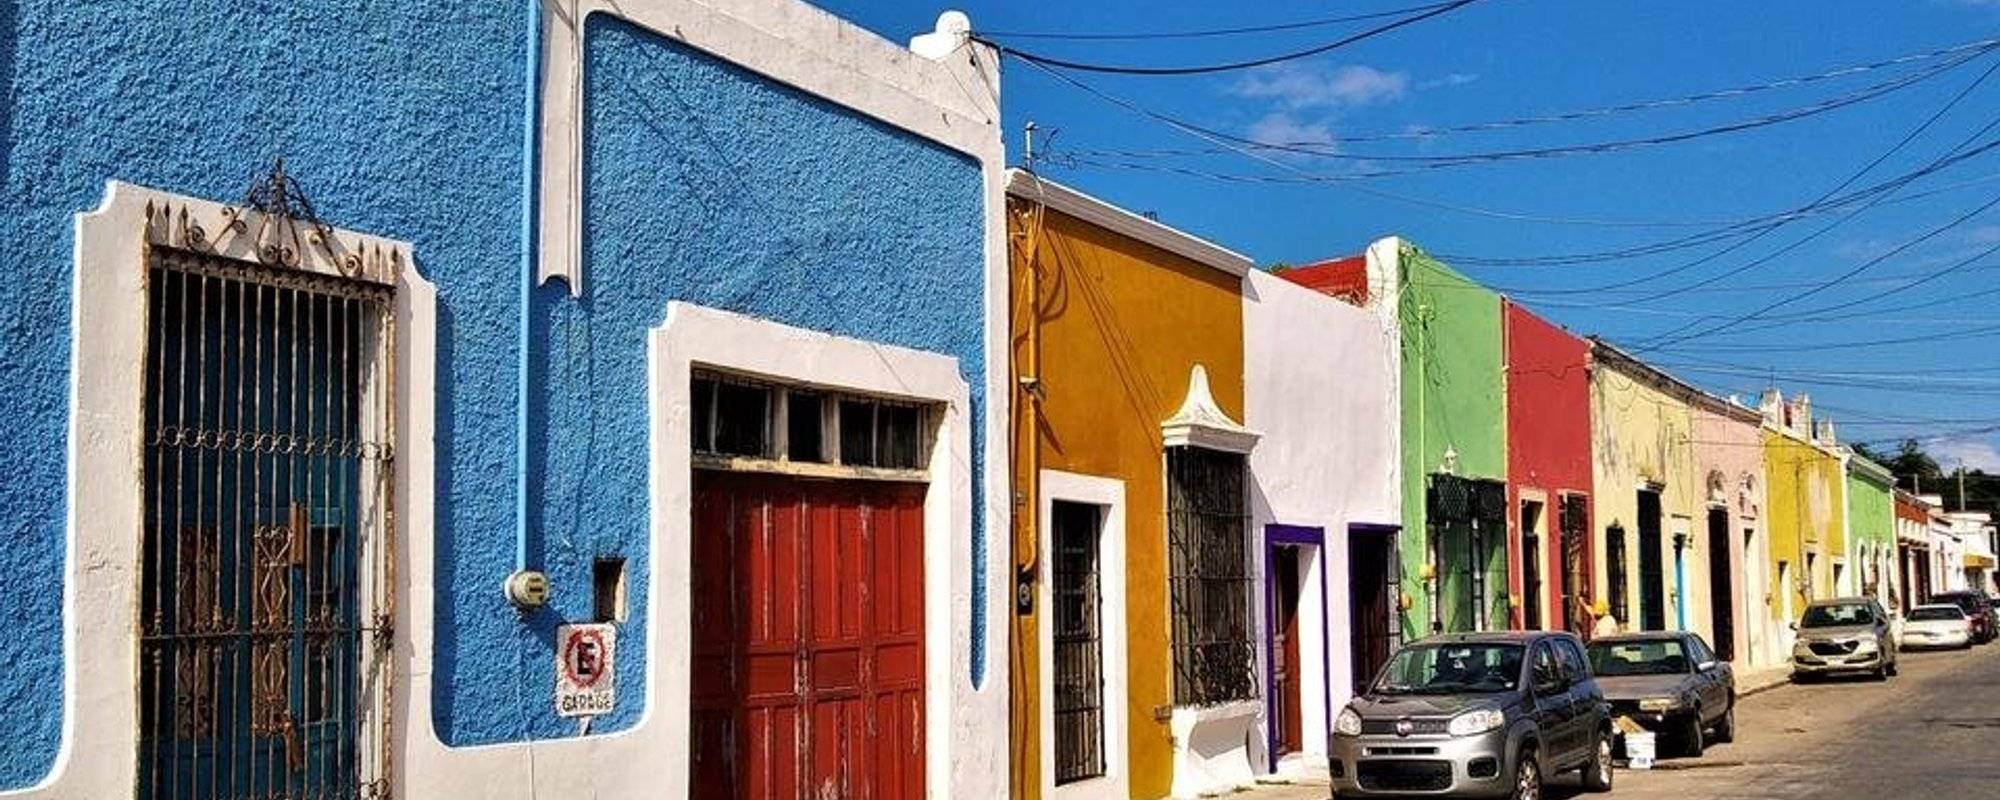 Beauties of Yucatan: picturesque colorful houses of Campeche - part 1